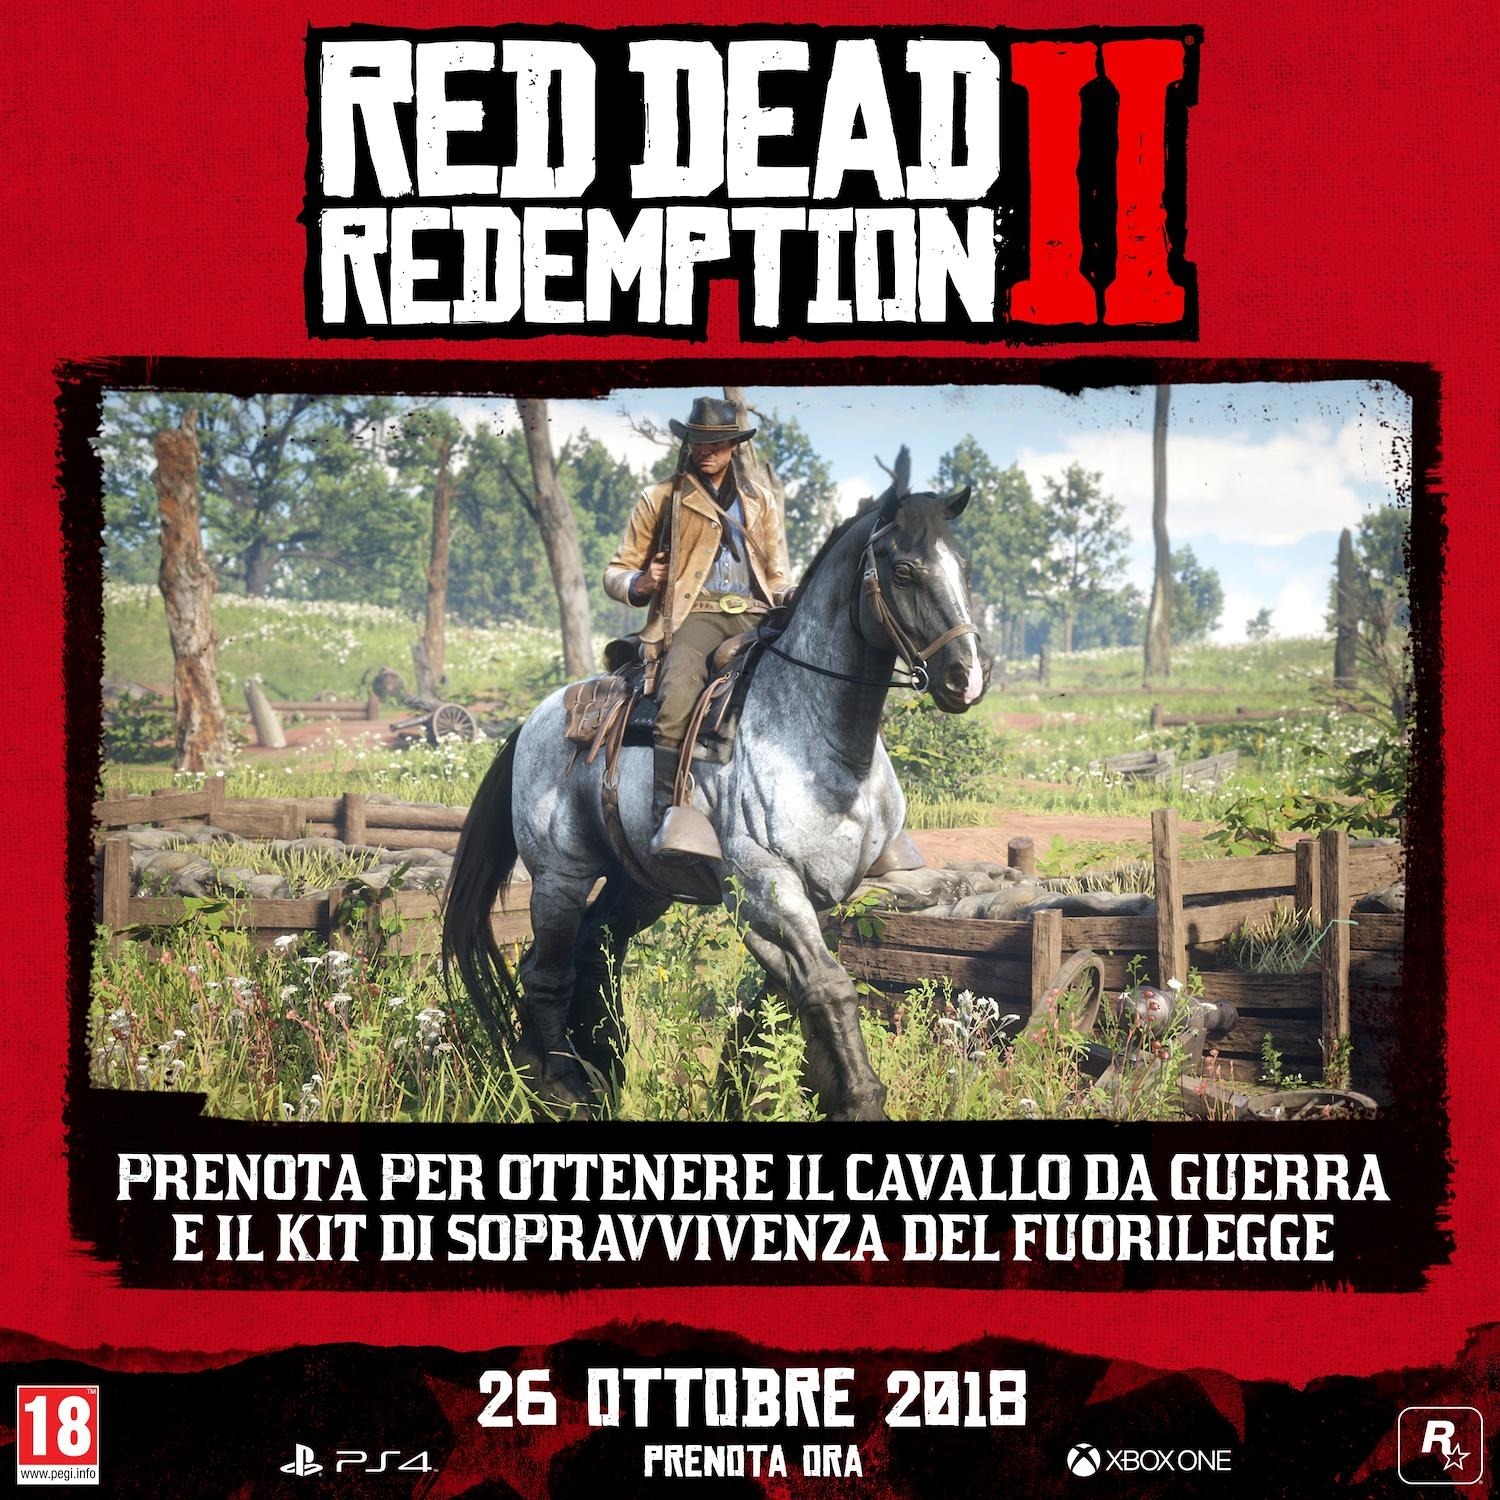 Gioco PS4 Red Dead Redemption 2 Dayone Edition - DIMOStore